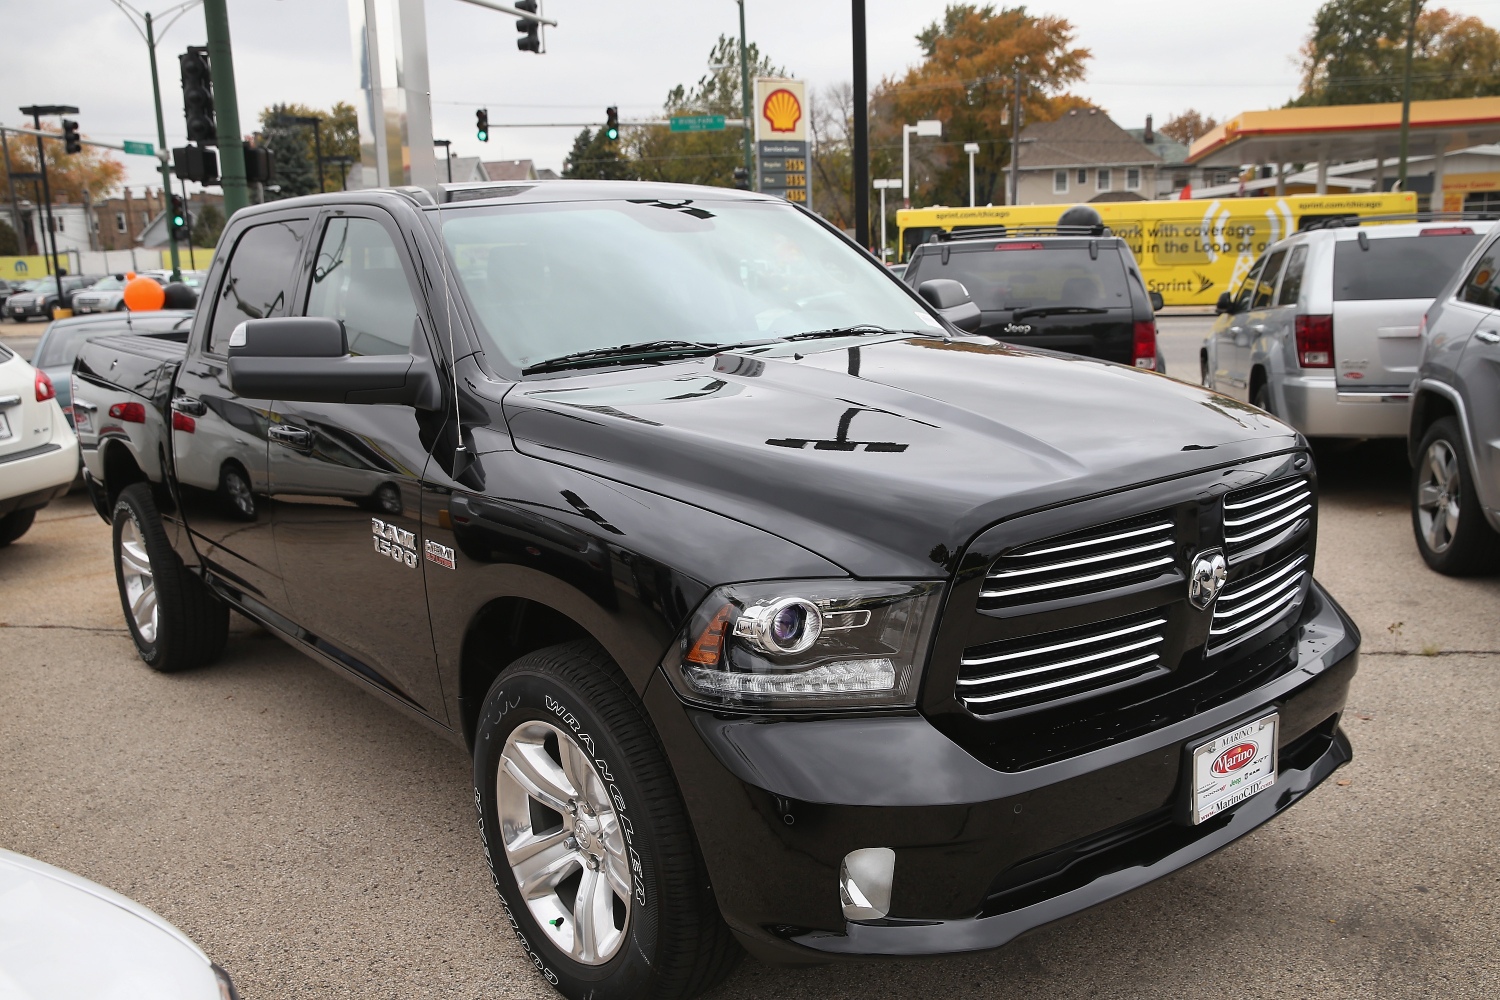 Reasons to consider the 2013 Ram 1500